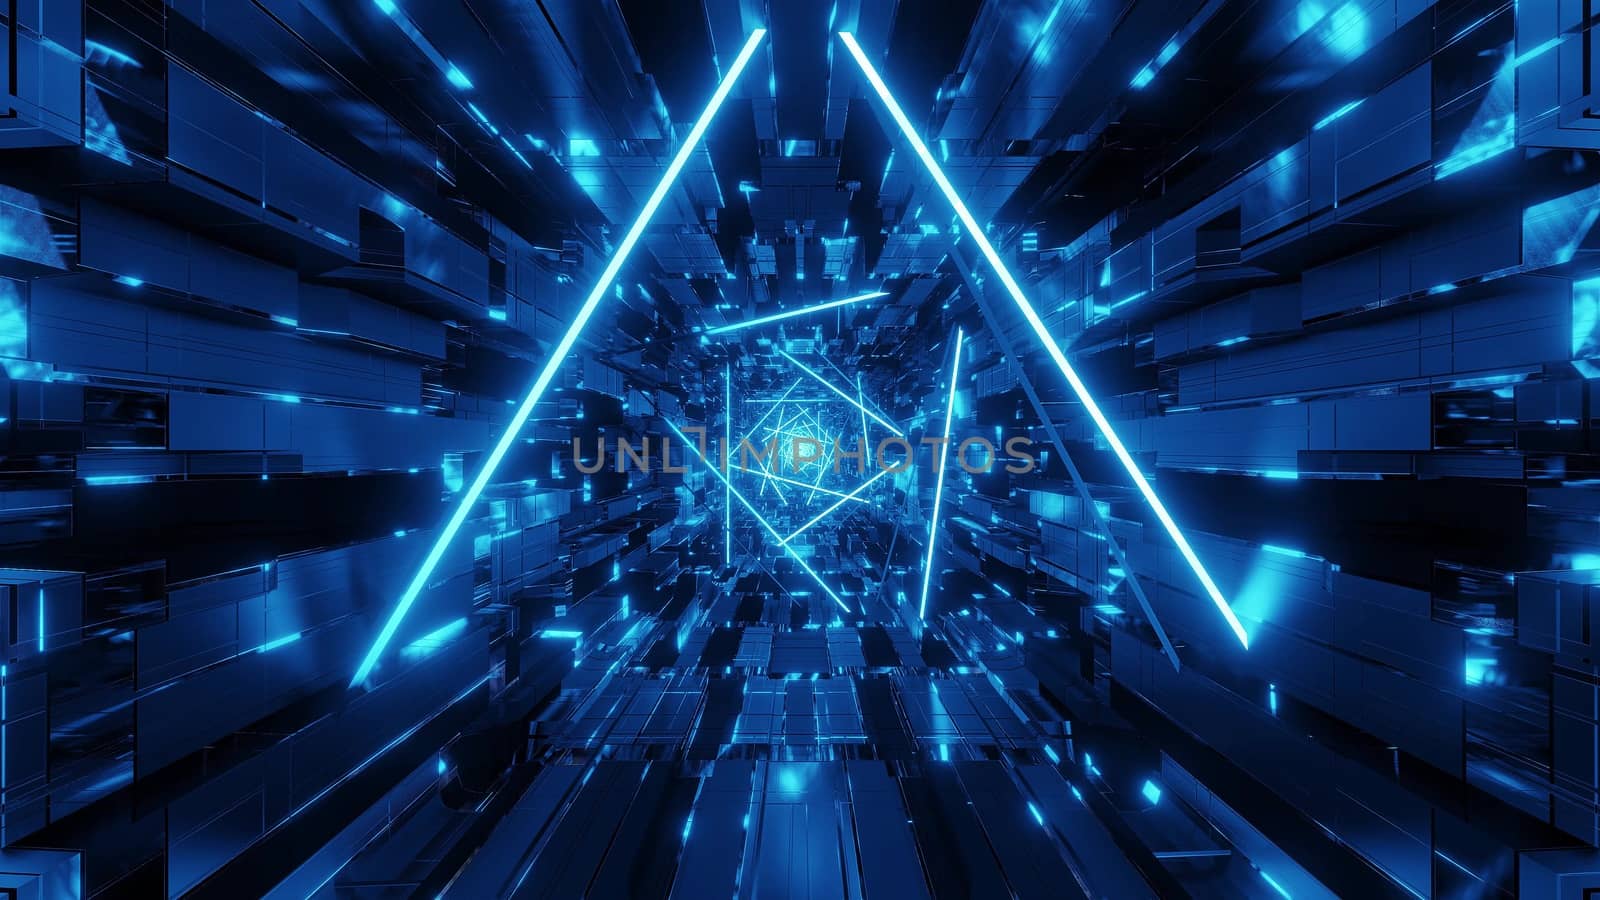 abstract glowing wireframe design graphic artworkwith technical tunnel corridor 3d illustration background wallpaper, glowing neon triangle 3d rendering art design